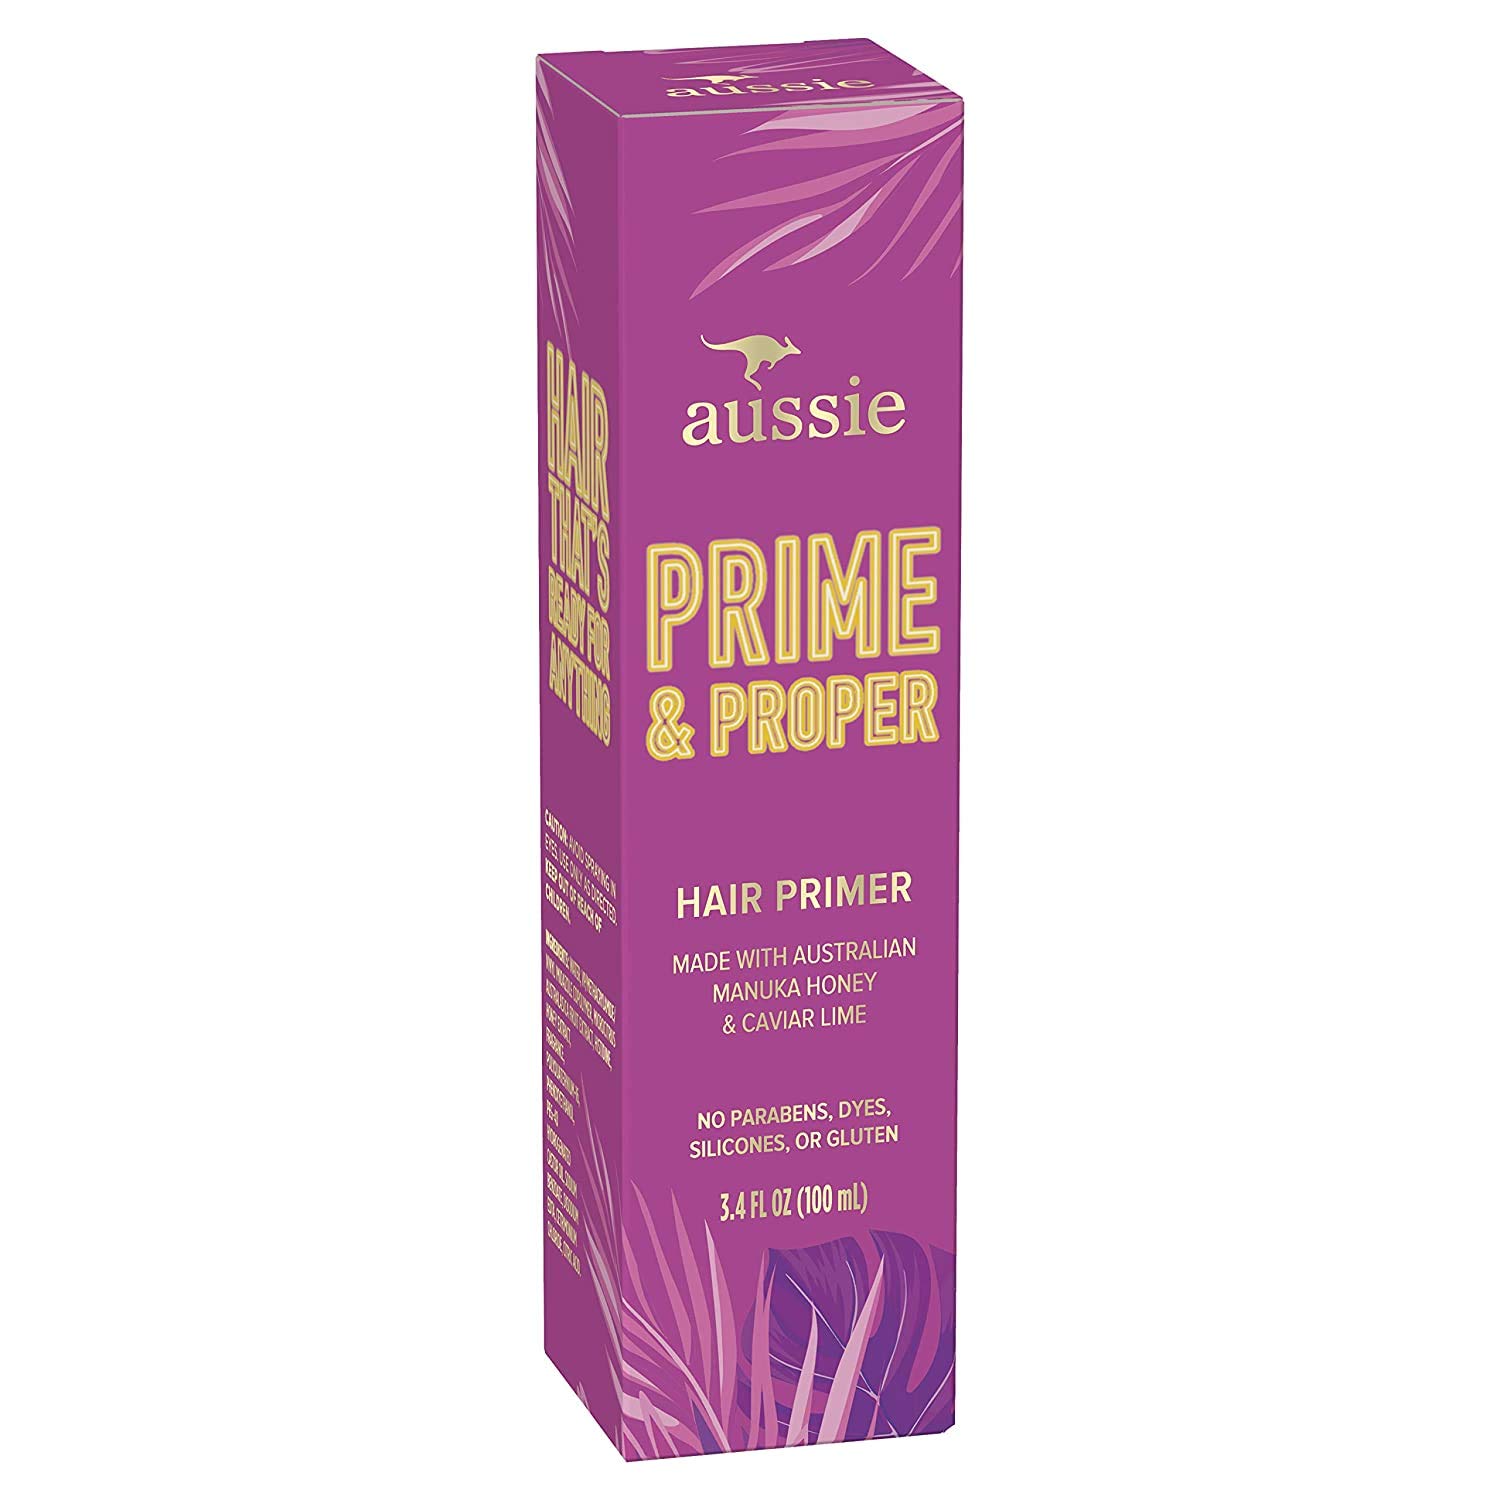 Aussie Prime & Proper Hair Primer Treatment, Heat Protectant Spray, Paraben & Dye Free, Infused with Australian Manuka Honey and Caviar Lime, RED, 3.4 Fl Oz